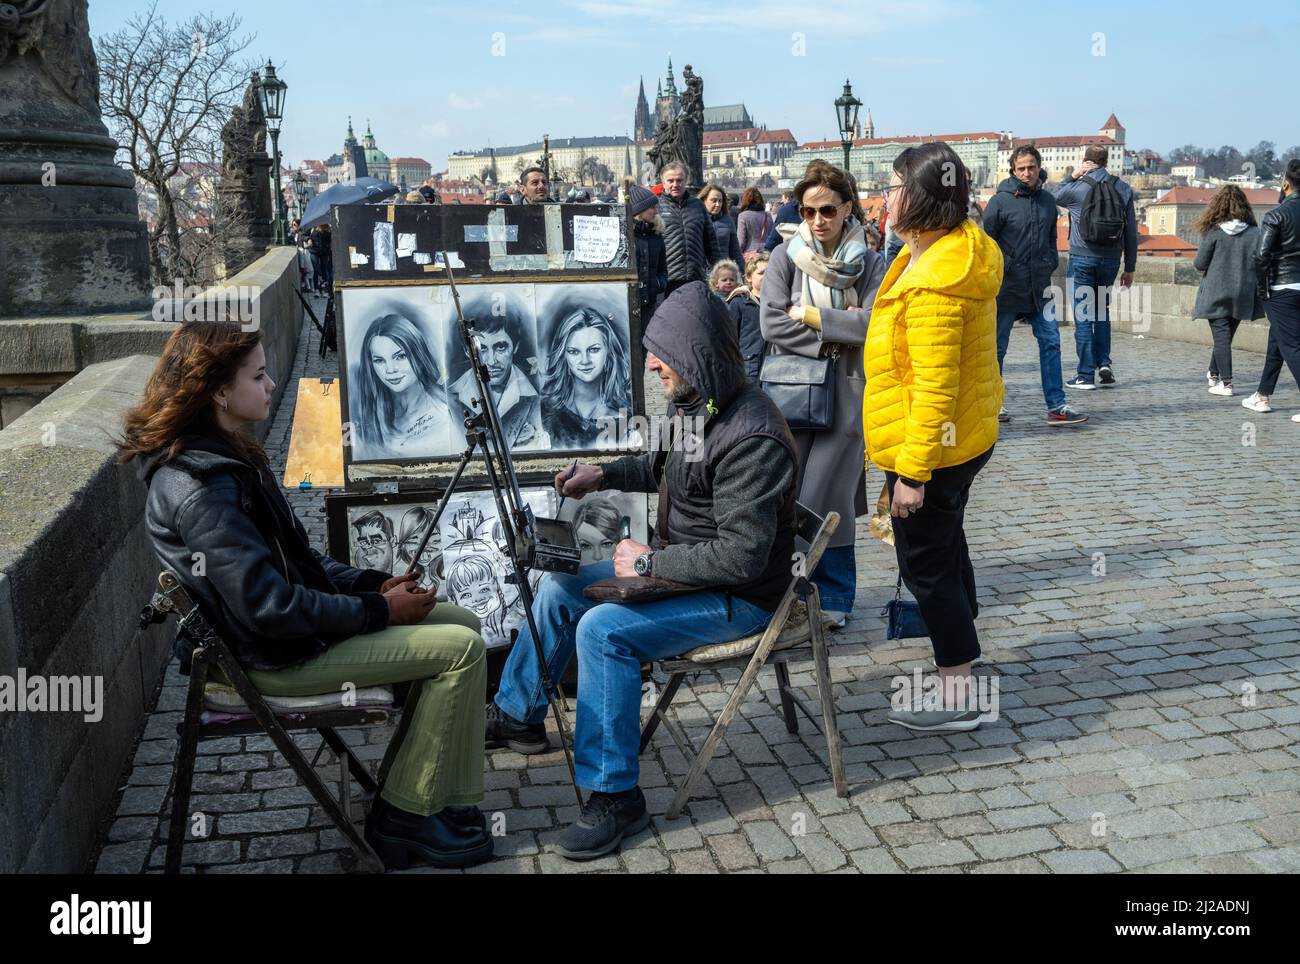 A street artist drawing a picture of a tourist at The Charles Bridge, Prague, Czech Republic. Stock Photo